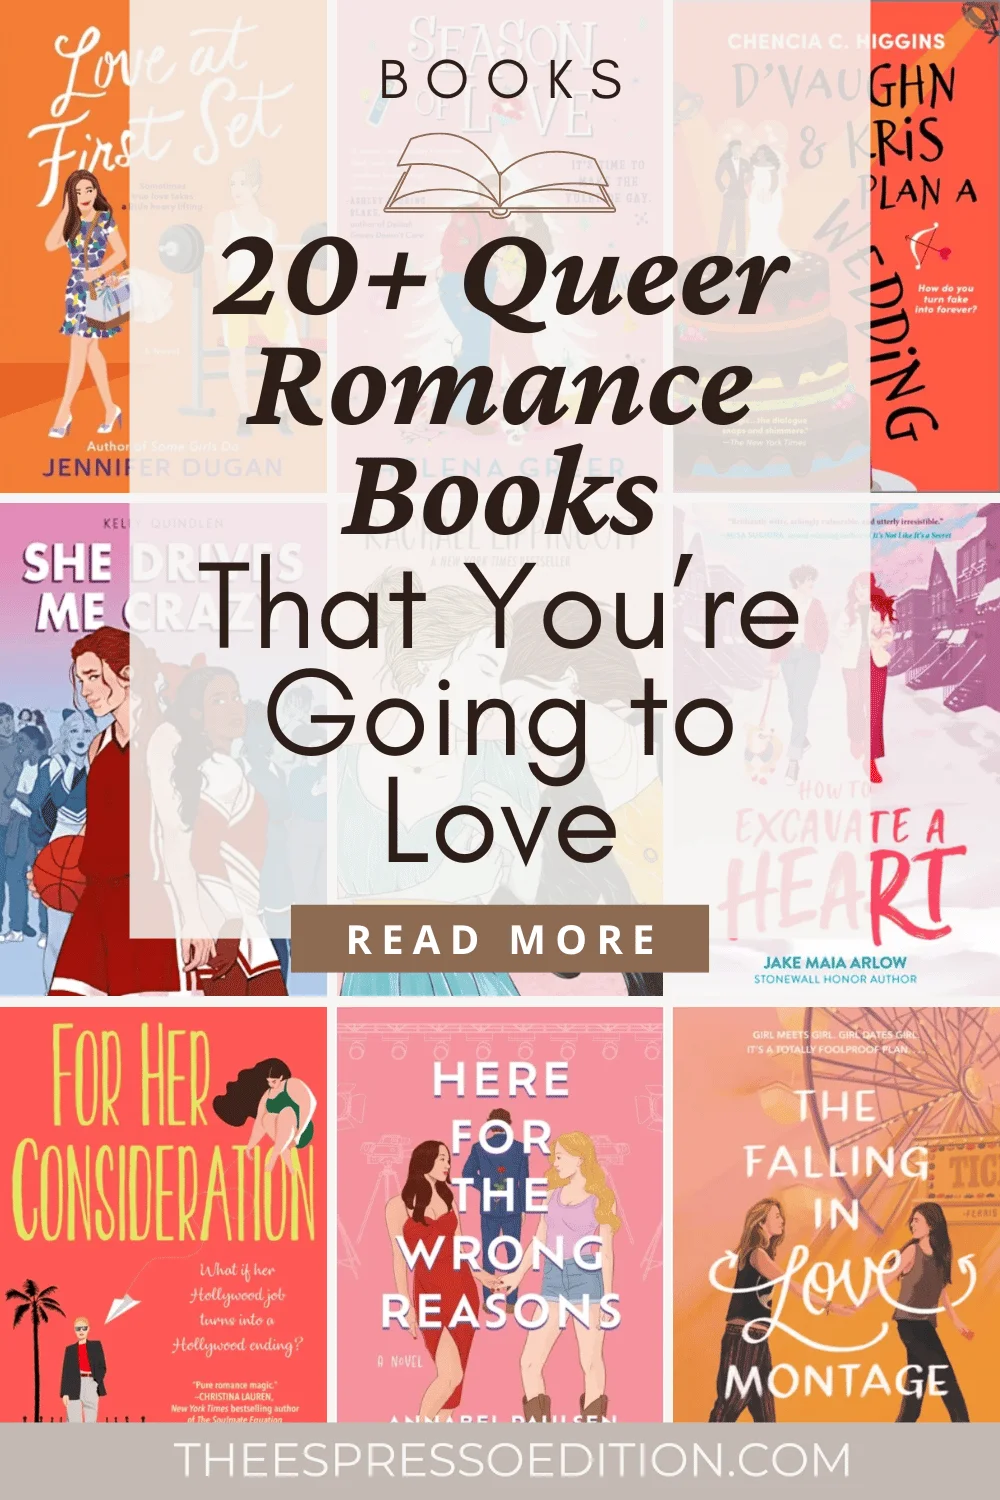 20+ Queer Romance Books That You're Going to Love by The Espresso Edition cozy bookish blog